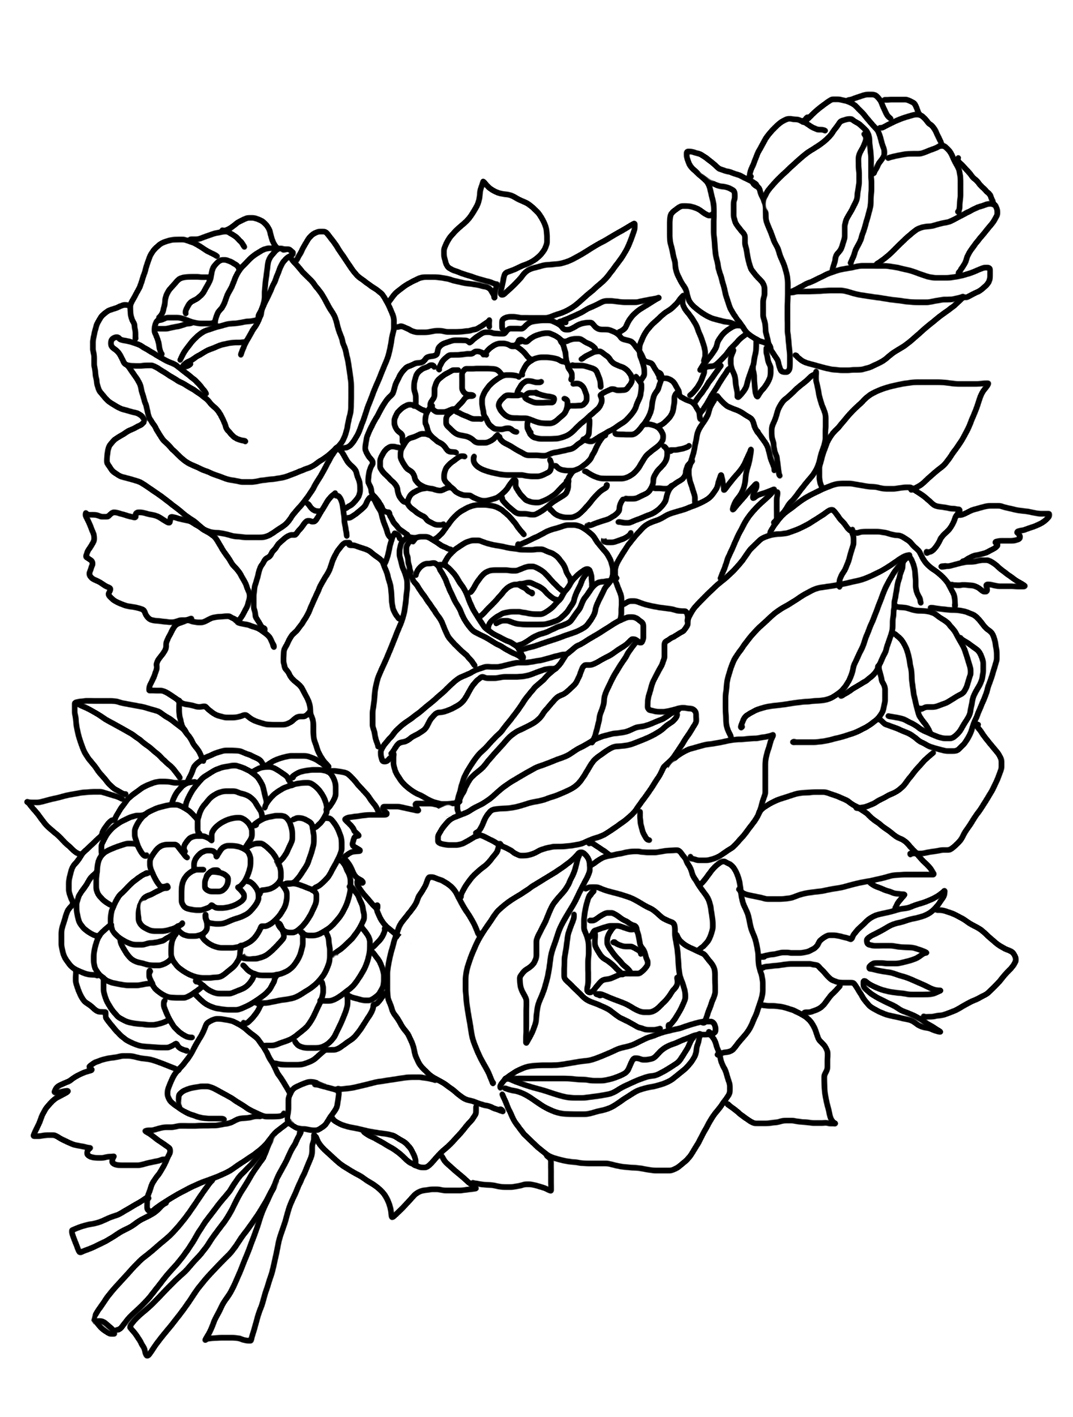 Coloring Sheets Of Flowers 8